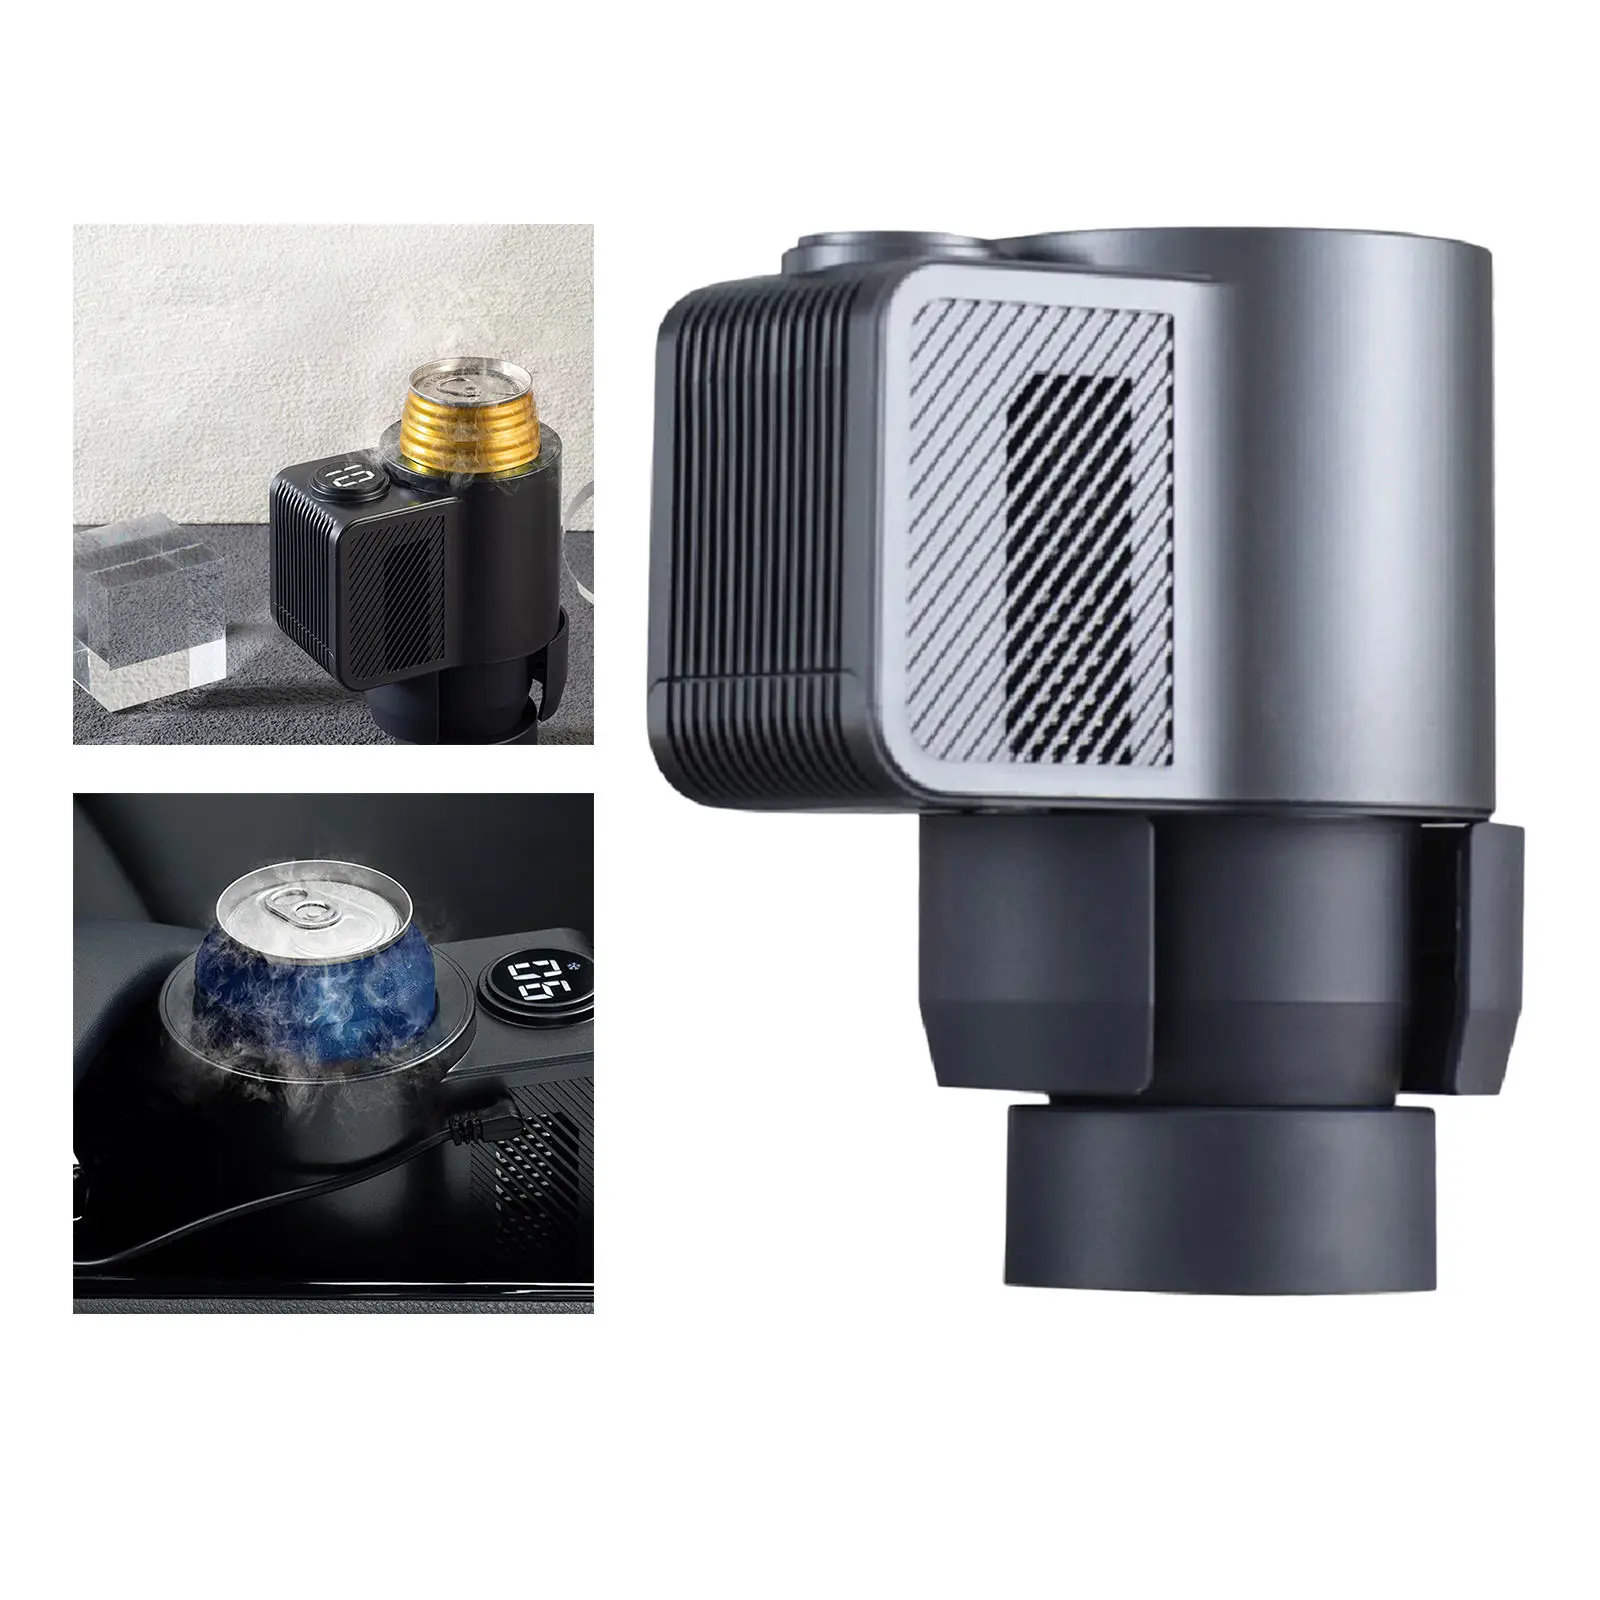 2 In 1 Smart Cooling & Heating Car Cup Electric Coffee Warmer and Cooler Beverage Mug for 12V Cars